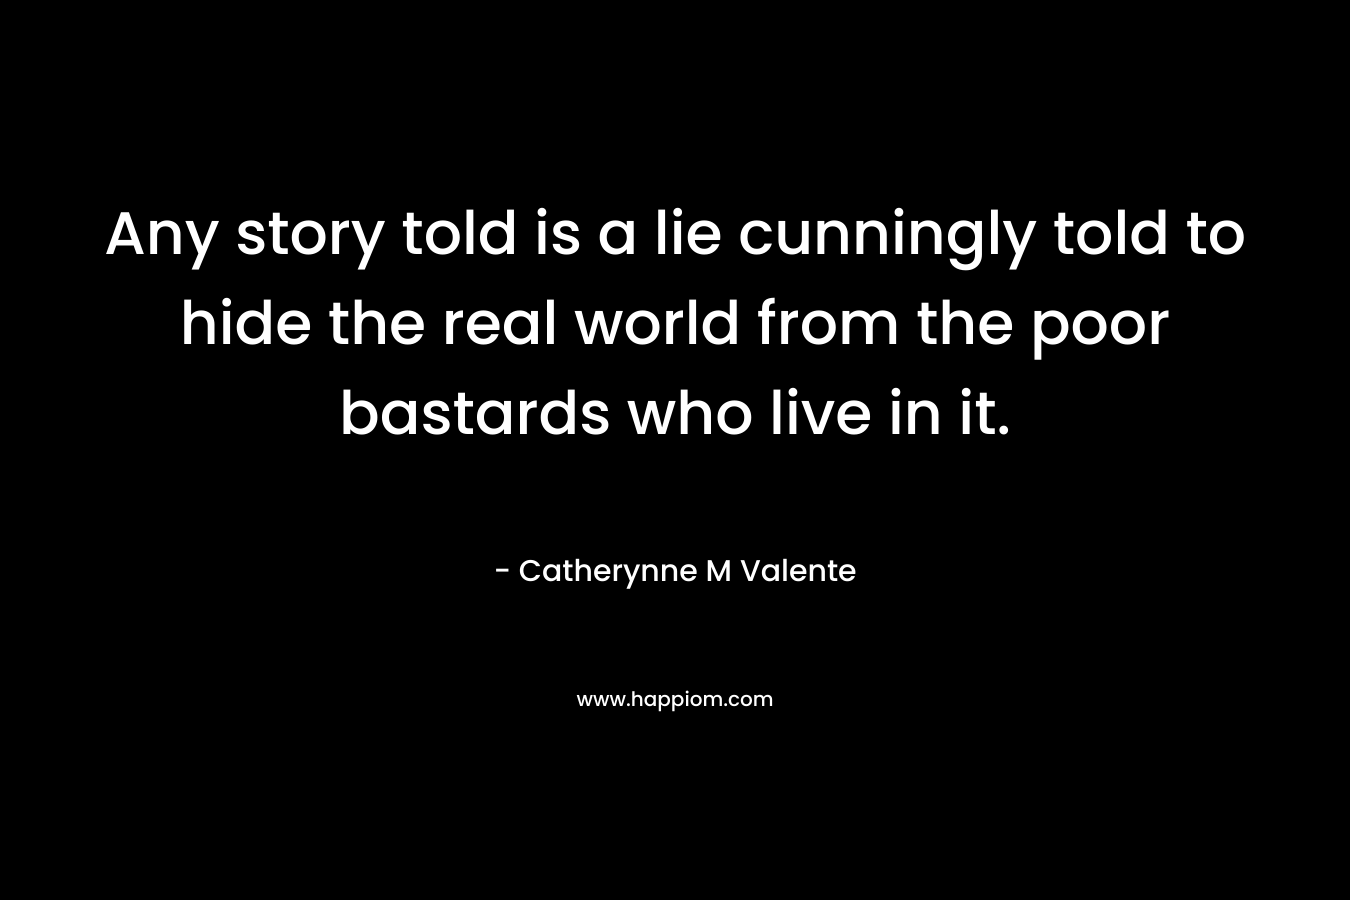 Any story told is a lie cunningly told to hide the real world from the poor bastards who live in it.